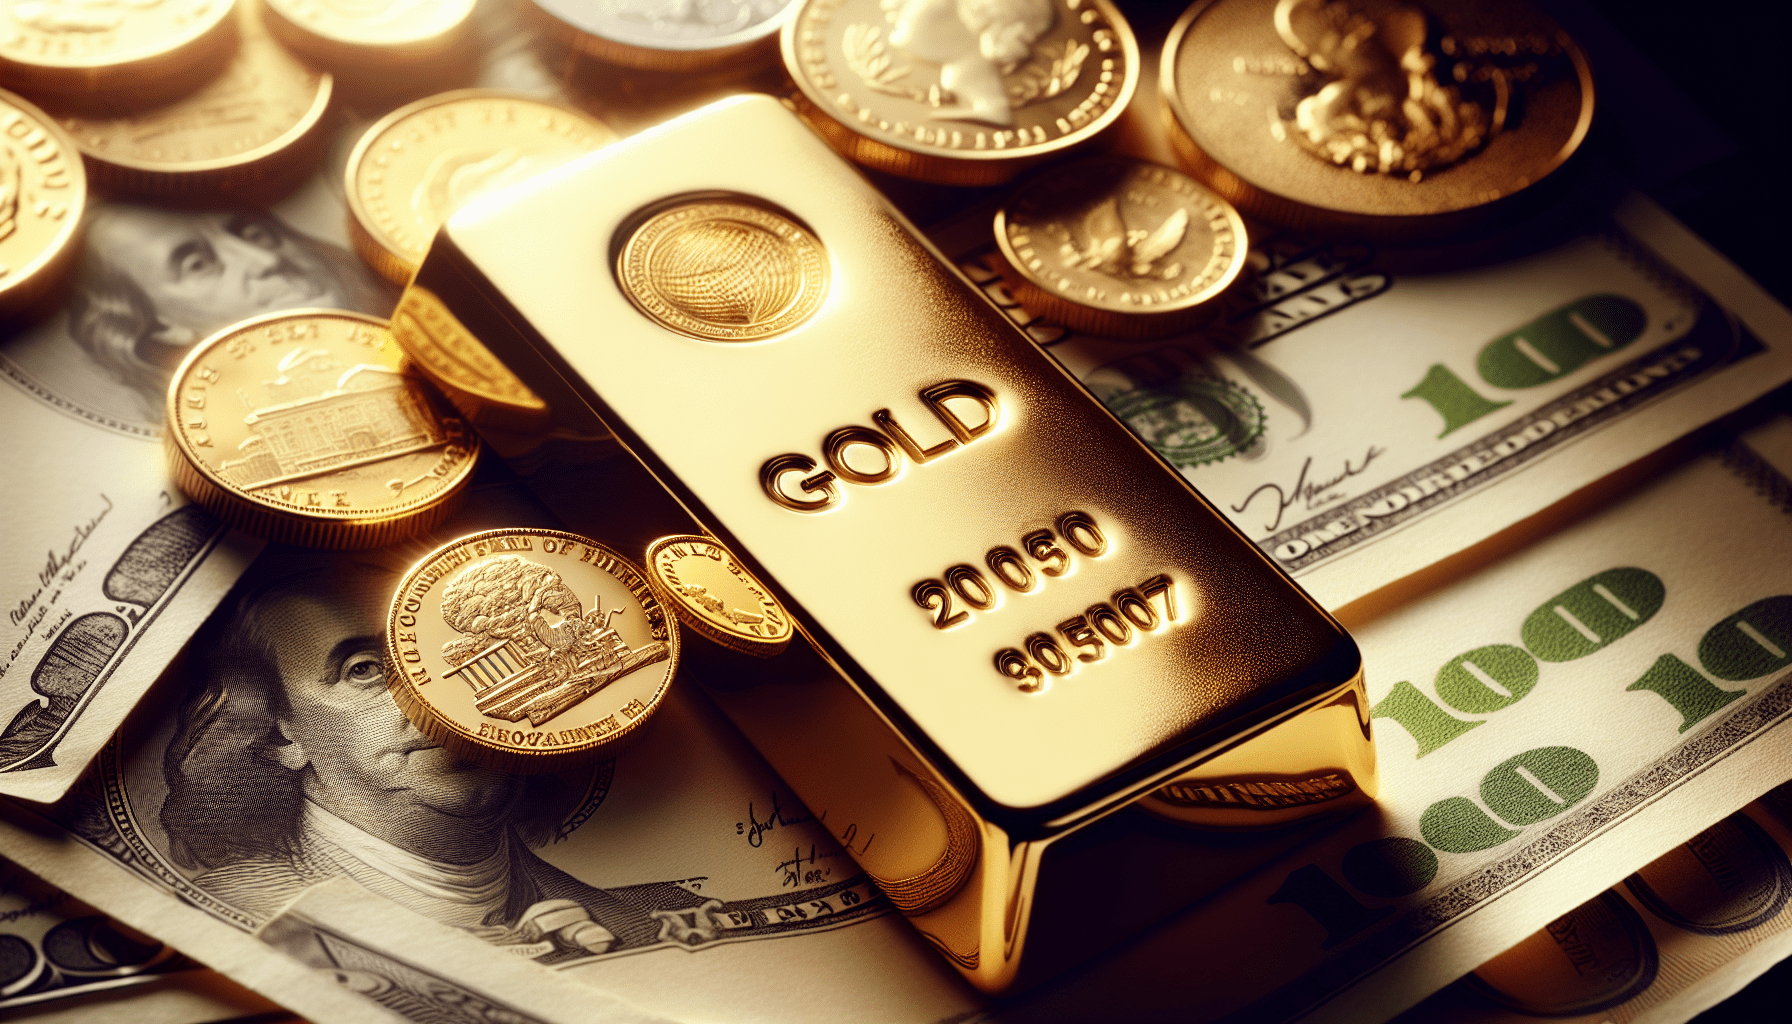 Can I Invest In Gold Using Foreign Currency With Malaysian Banks?